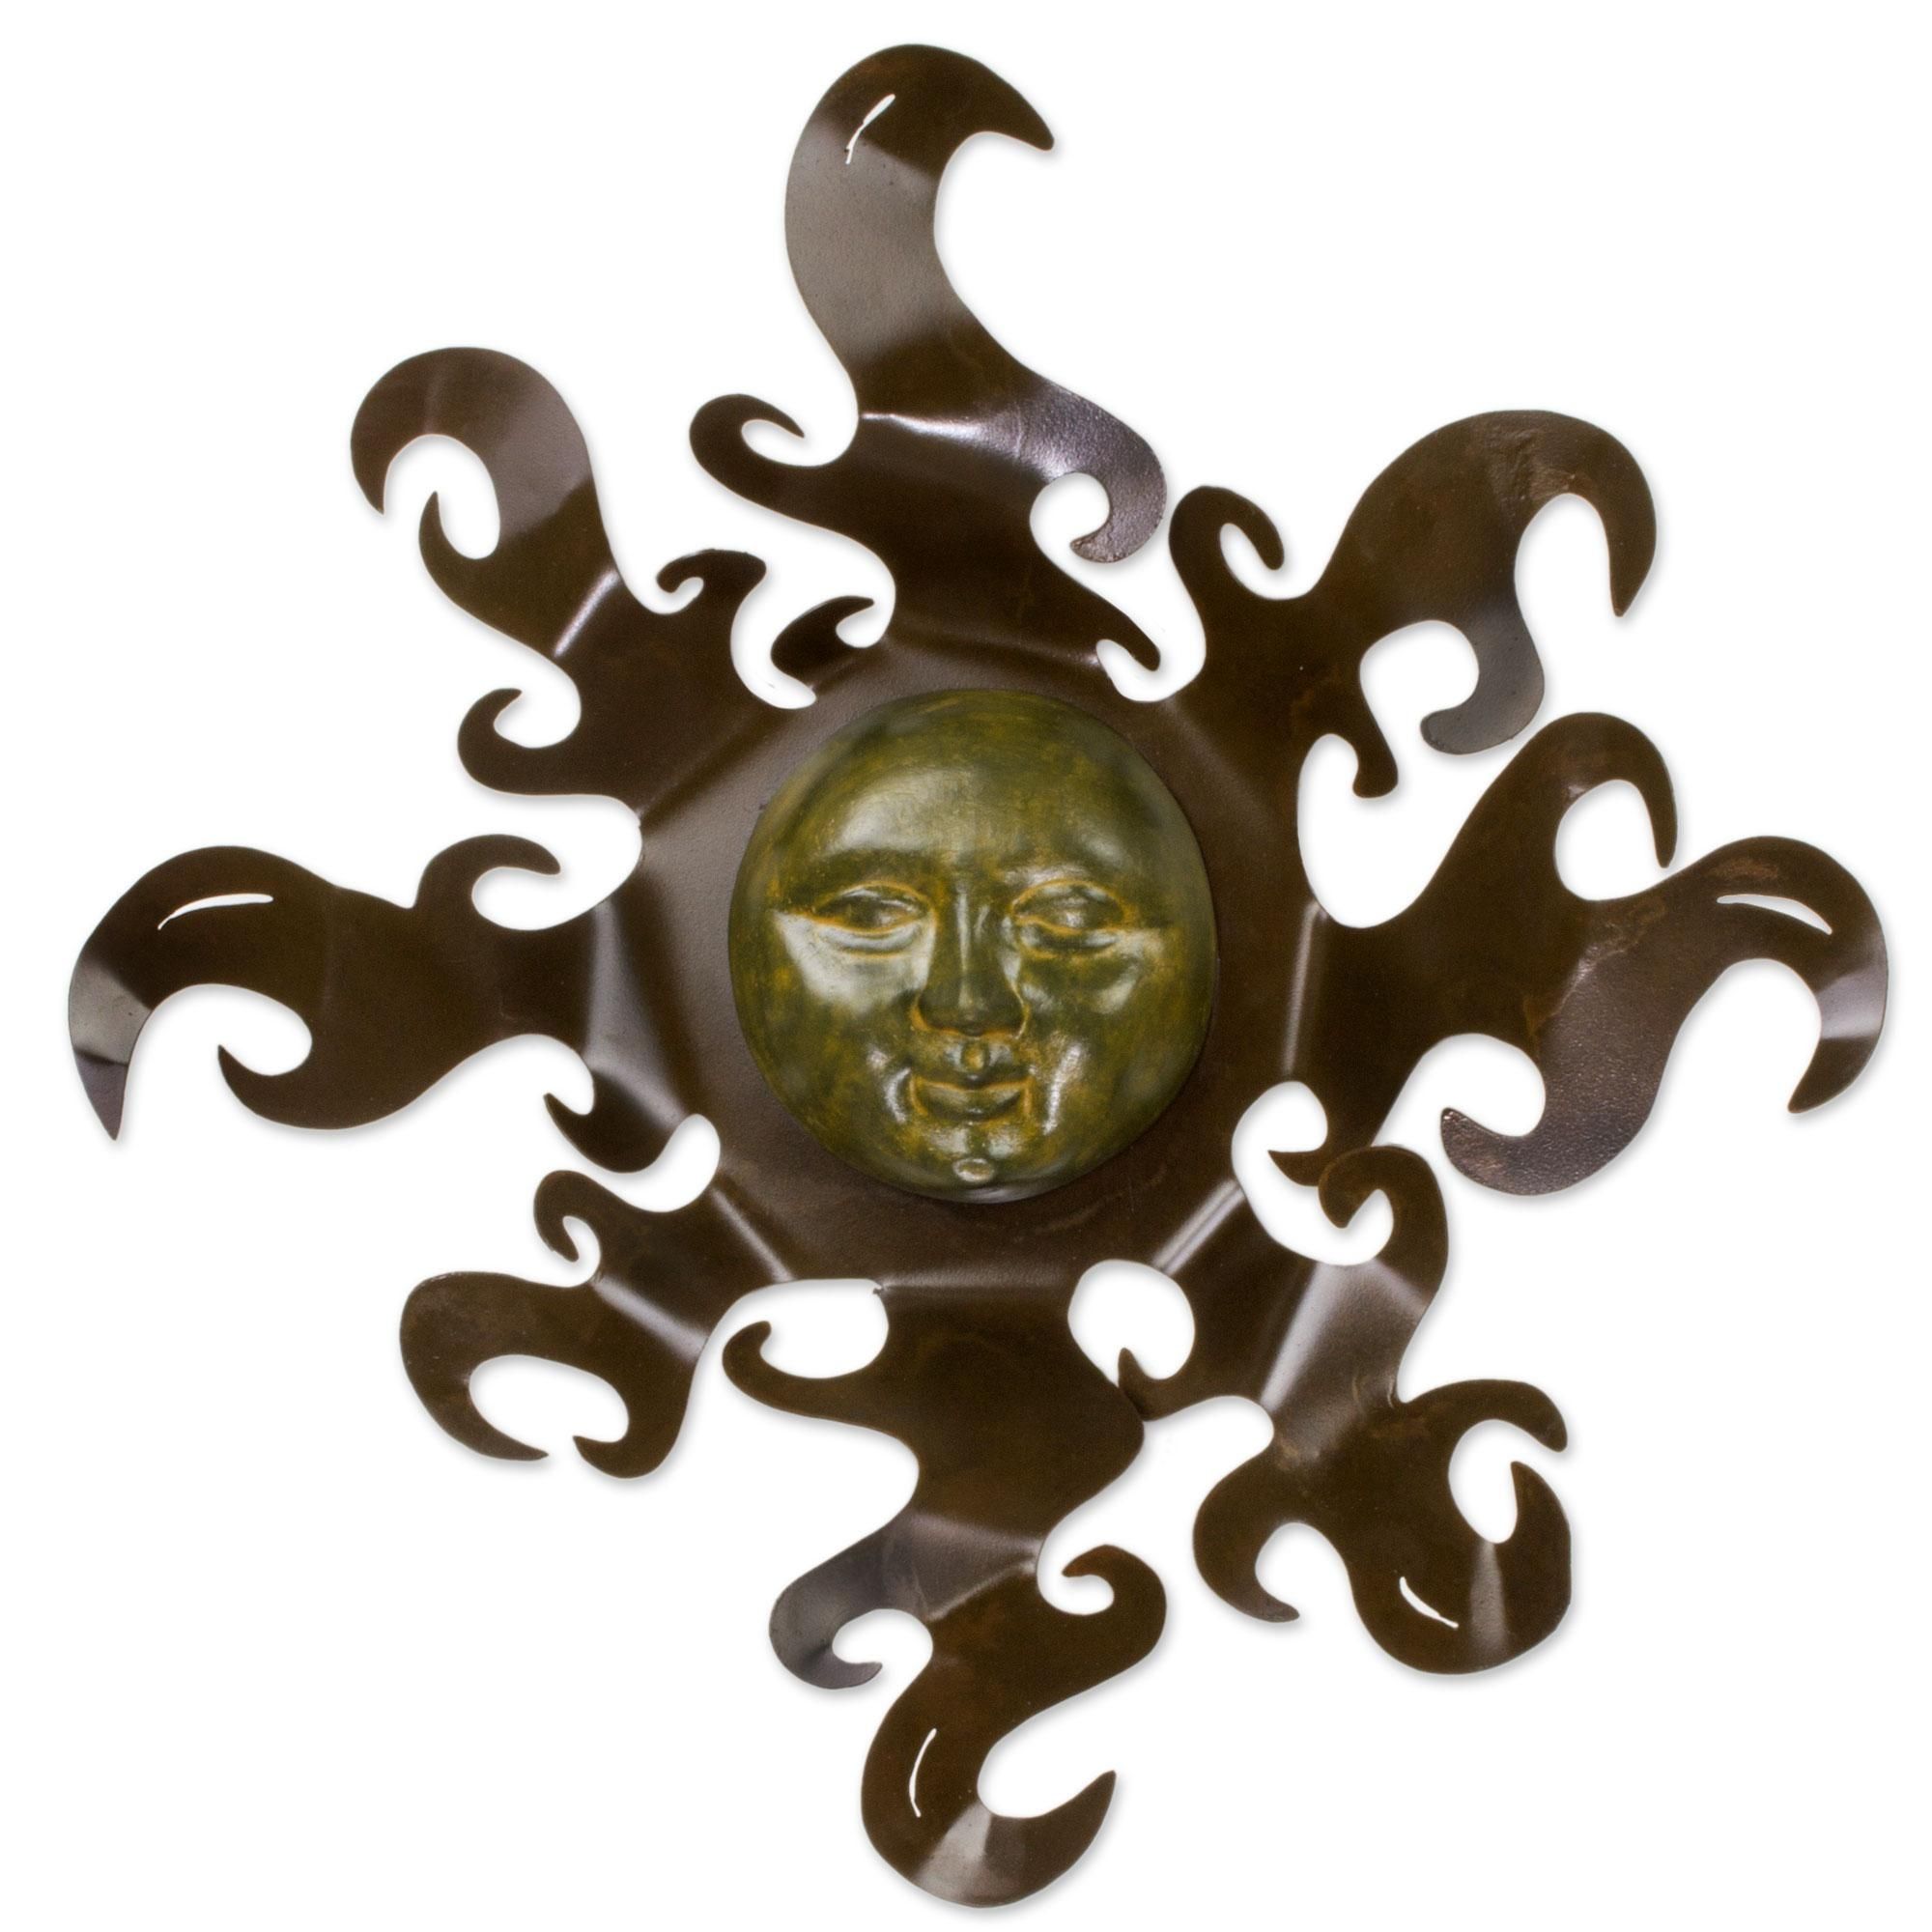 Sun Wall Sculpture Metal And Ceramic Art Handmade In Mexico With Regard To Mexican Metal Wall Art (View 6 of 20)